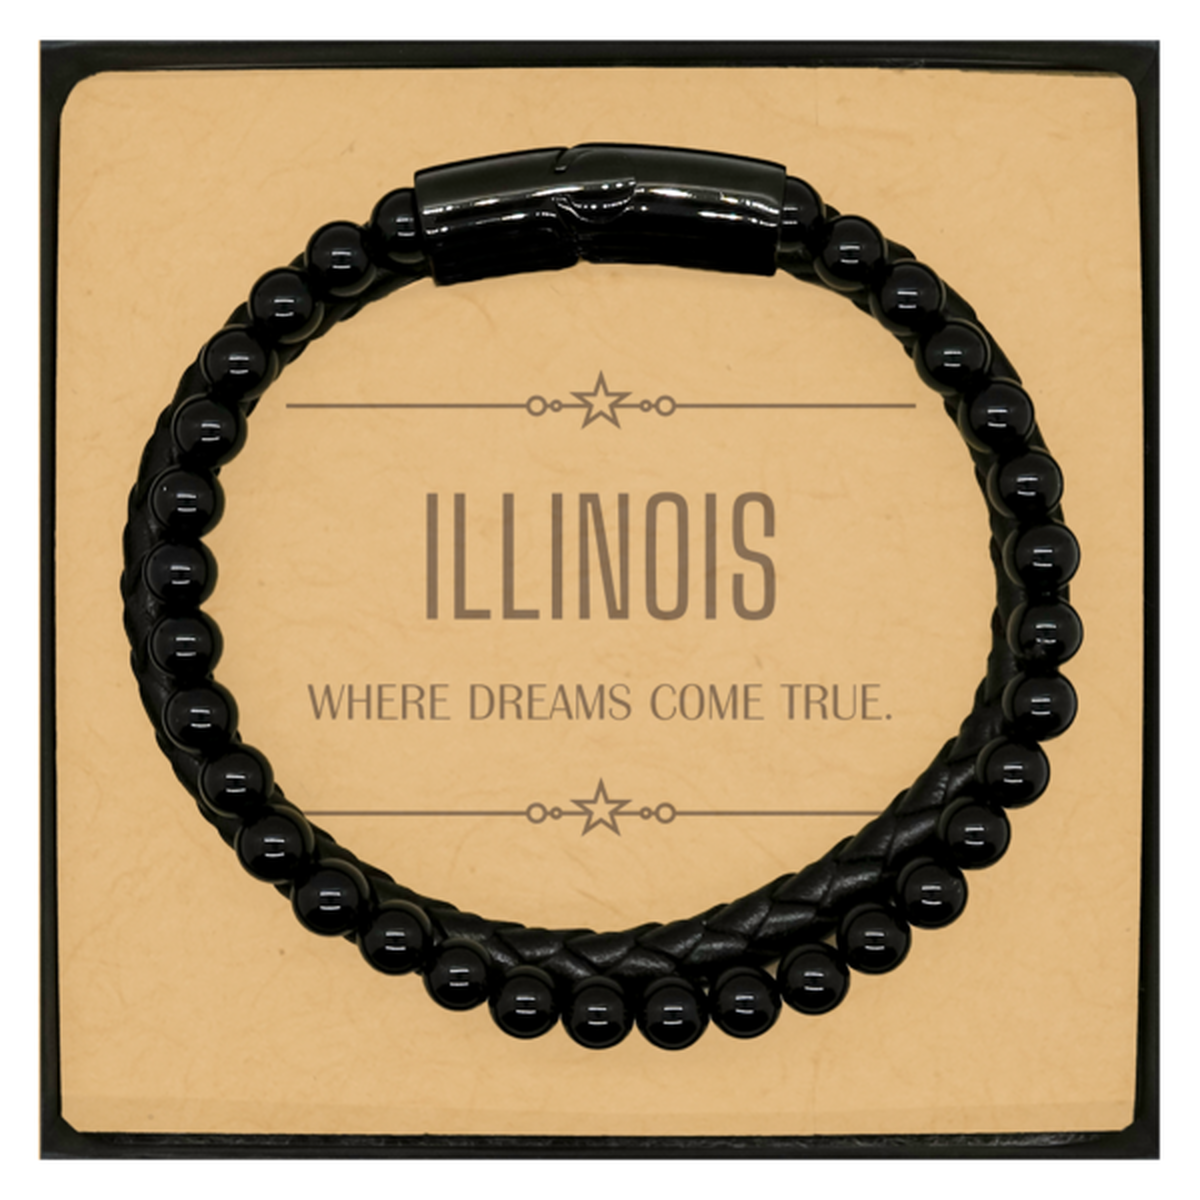 Love Illinois State Stone Leather Bracelets, Illinois Where dreams come true, Birthday Christmas Inspirational Gifts For Illinois Men, Women, Friends